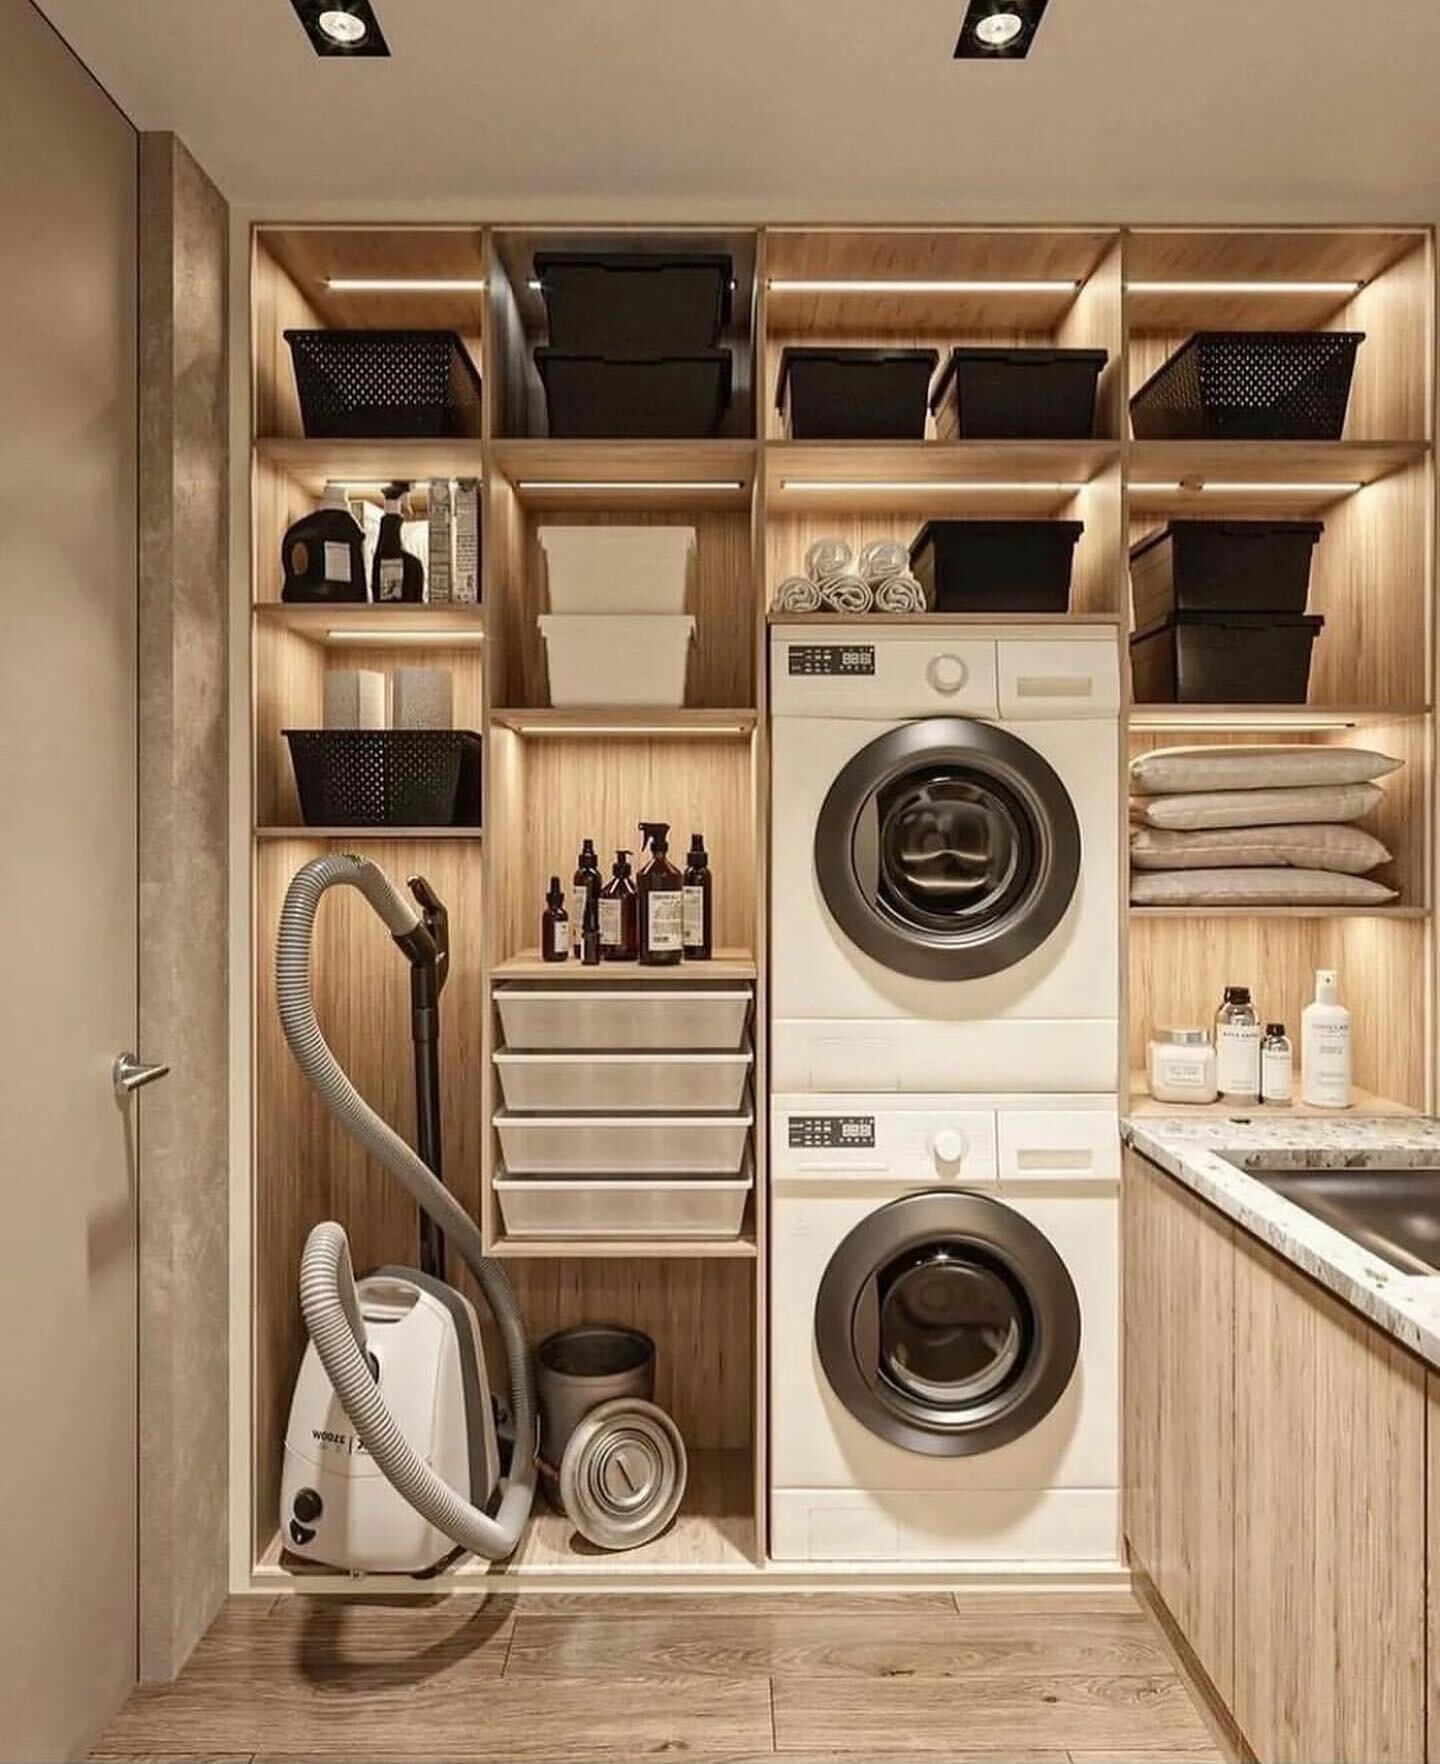 Some rainy day inspiration and compact utility/laundry room storage done right: 
⠀⠀⠀⠀⠀⠀⠀⠀⠀
✅ space for the vacuum cleaner
✅ drawers for laundered items such as socks &amp; T shirts
✅ Open baskets for backstock e.g kitchen rolls
✅ Stacked lidded boxes